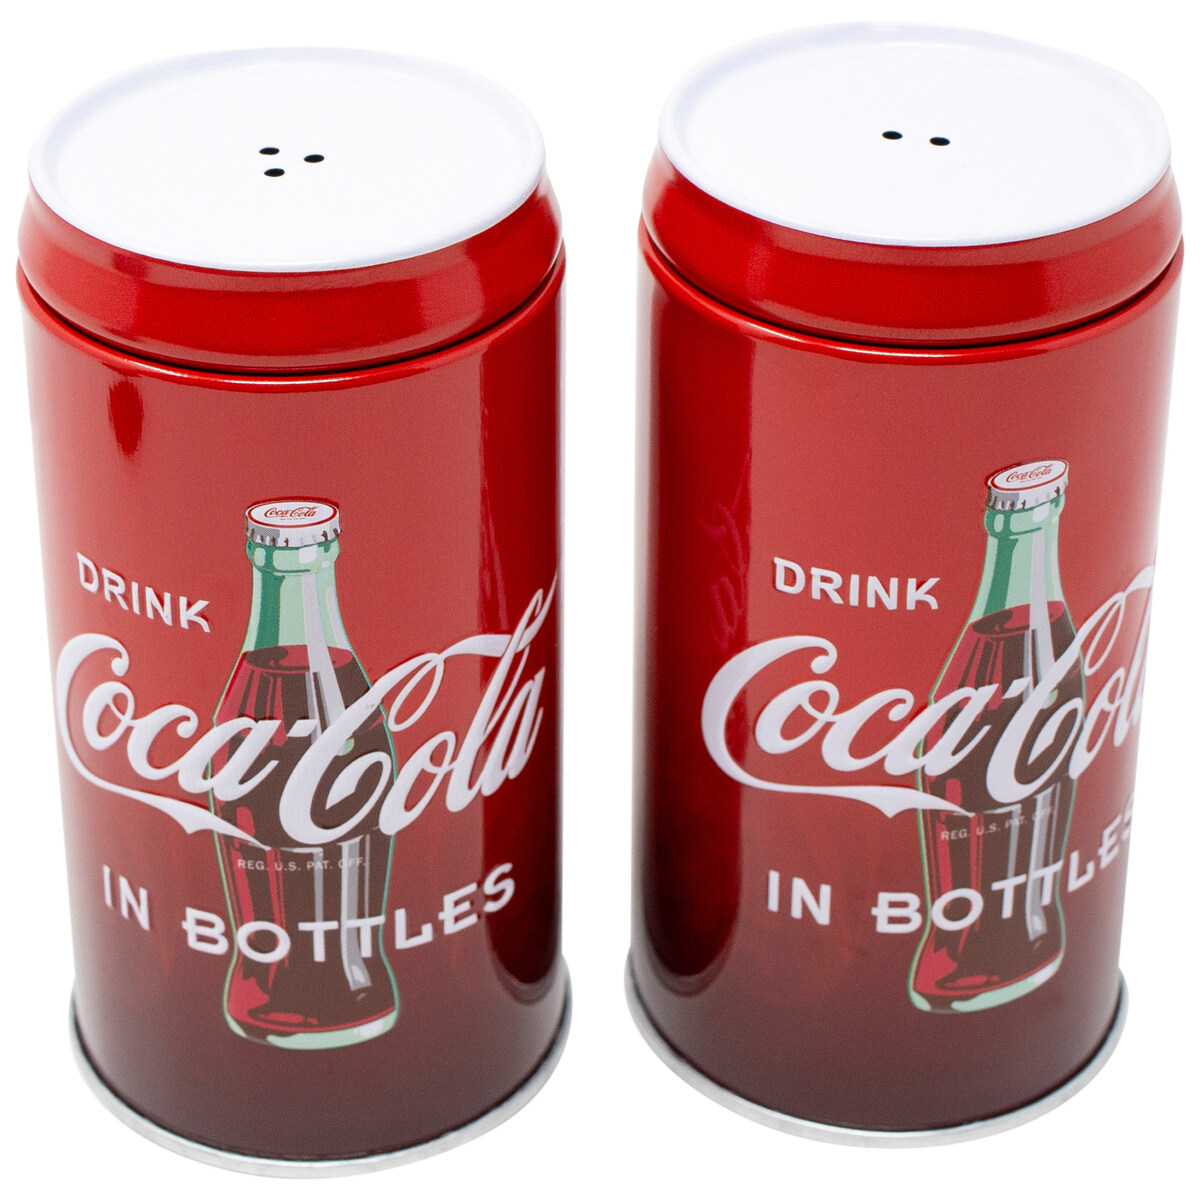 How To Remove Lids From Coca Cola Salt And Pepper Shakers